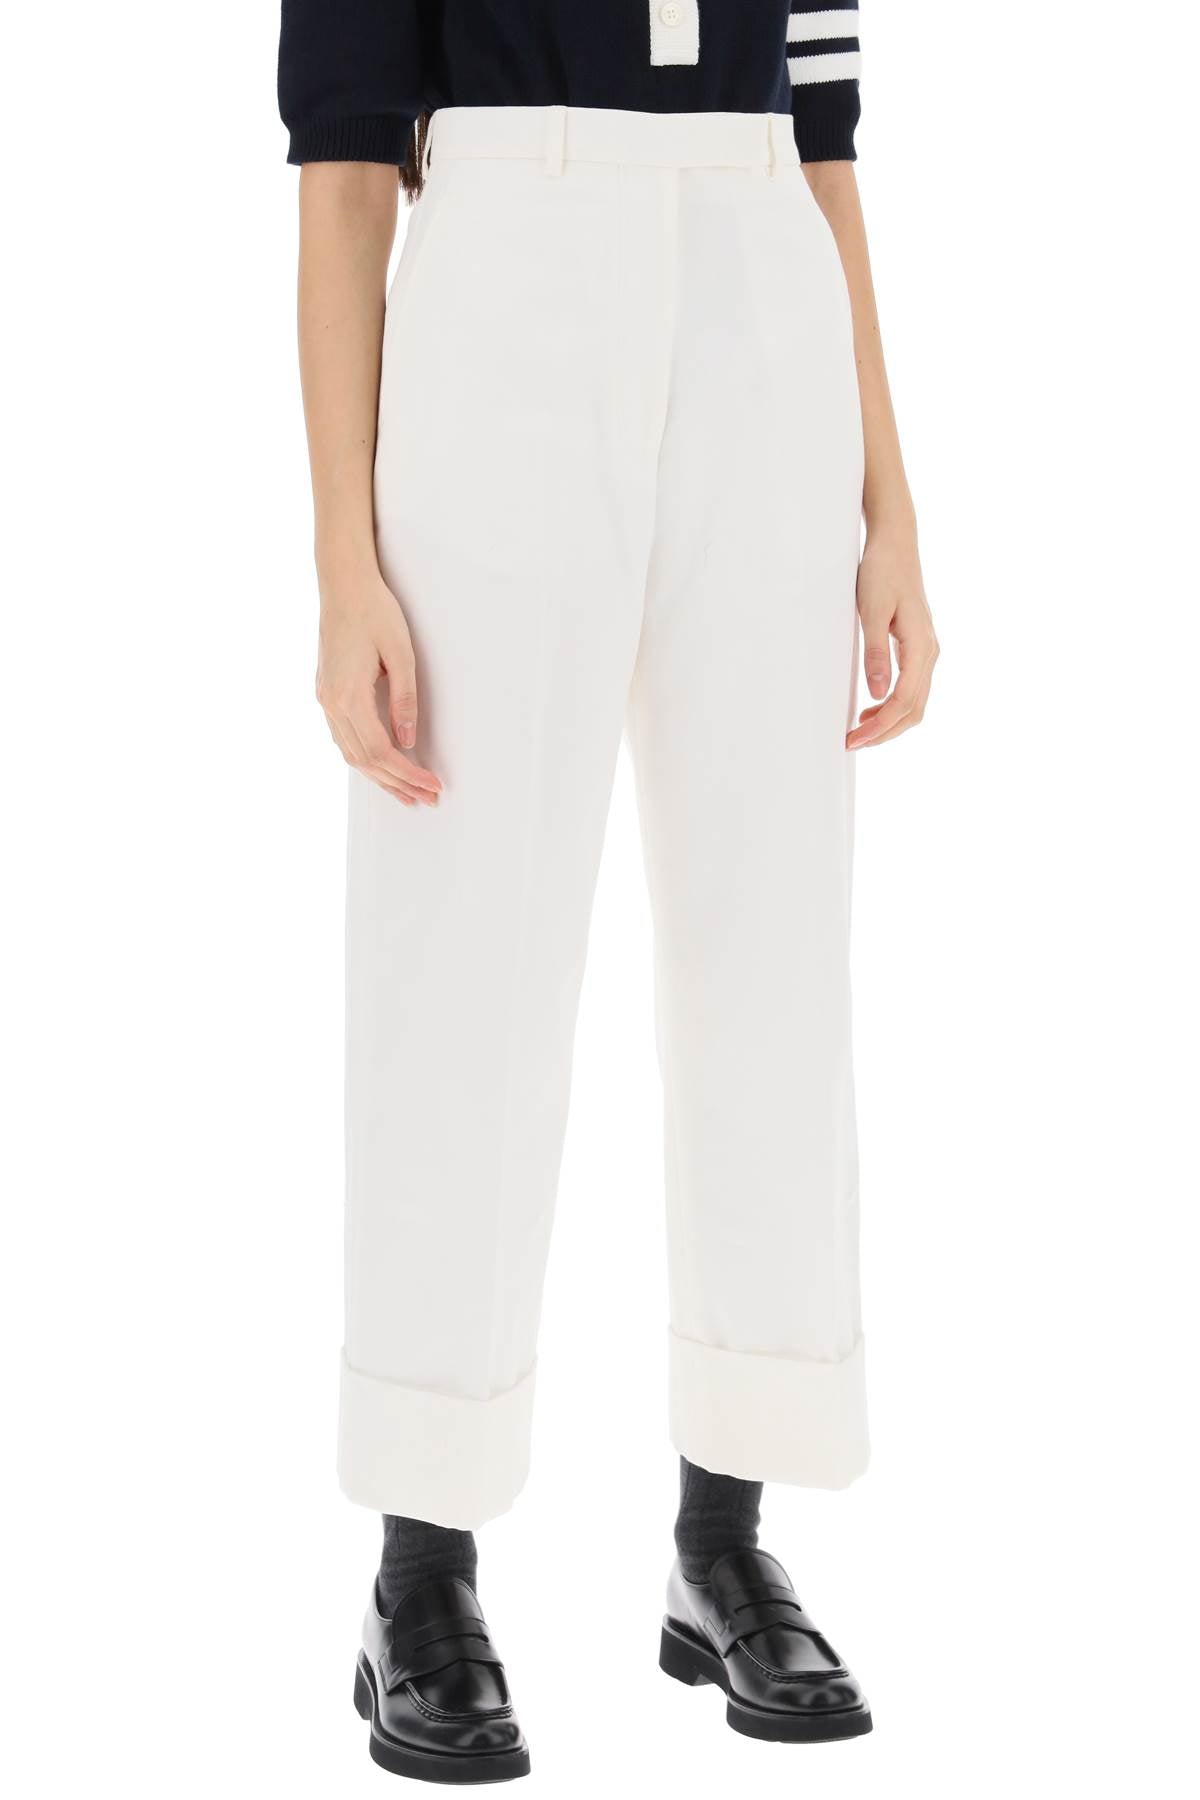 Thom browne cropped wide leg jeans-1